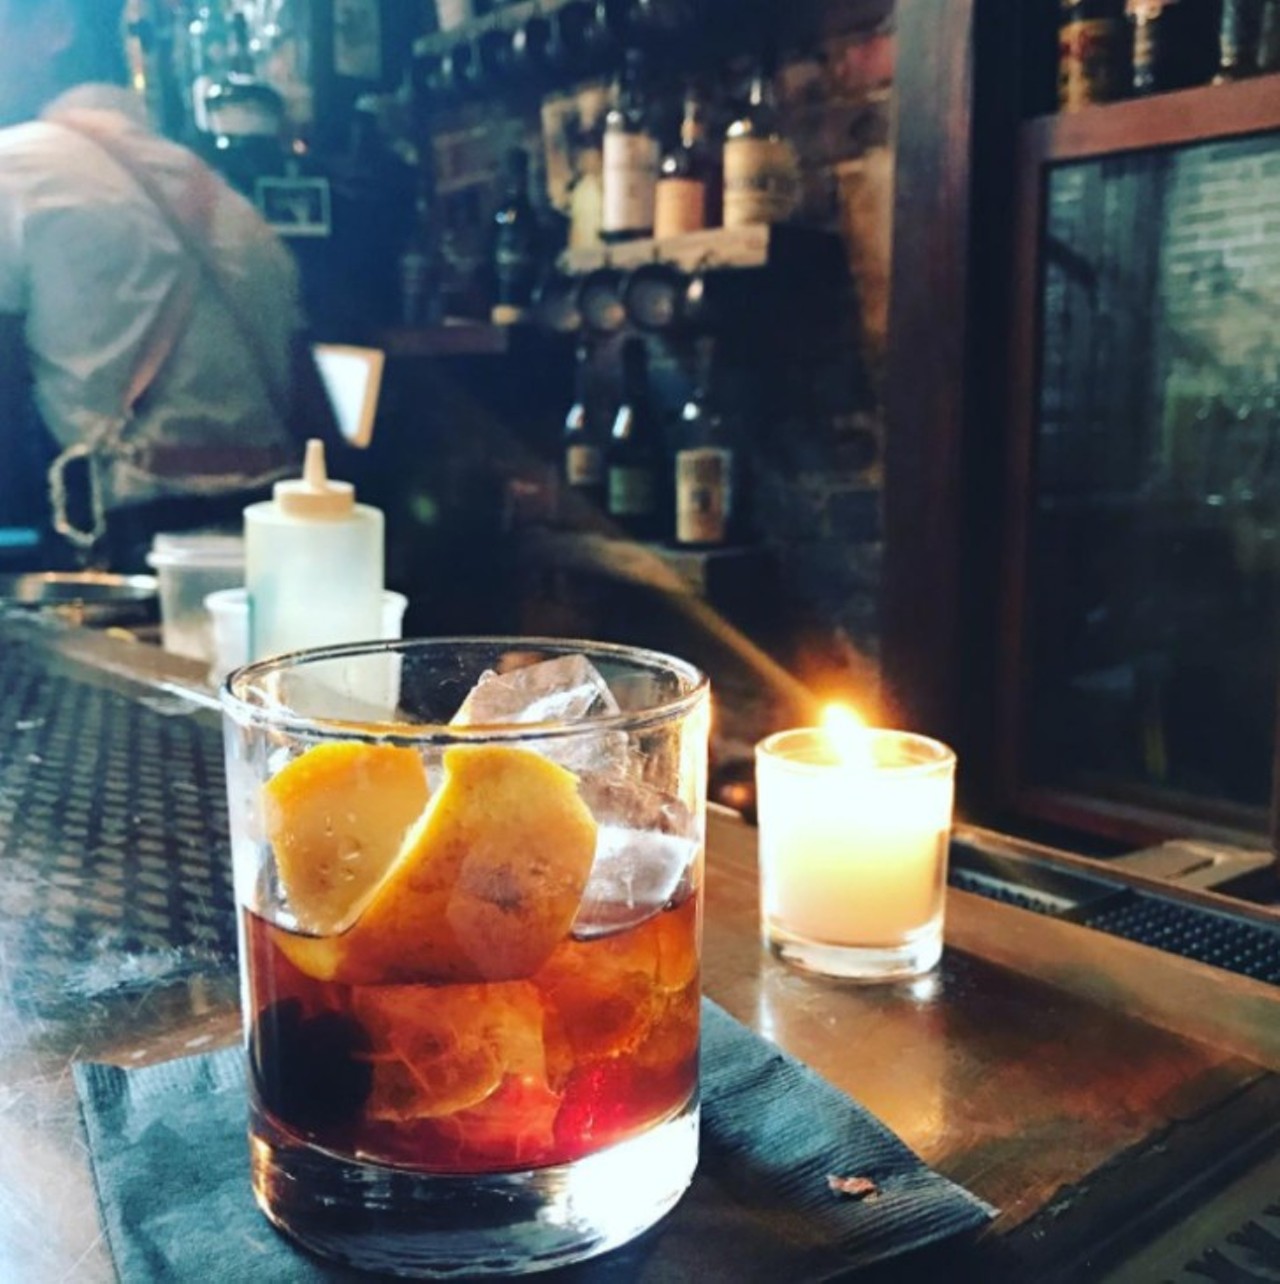 Hanson&#146;s Shoe Repair
What to drink: Bartender's choice is always a good bet here
Photo via nelsondbeverly27/Instagram